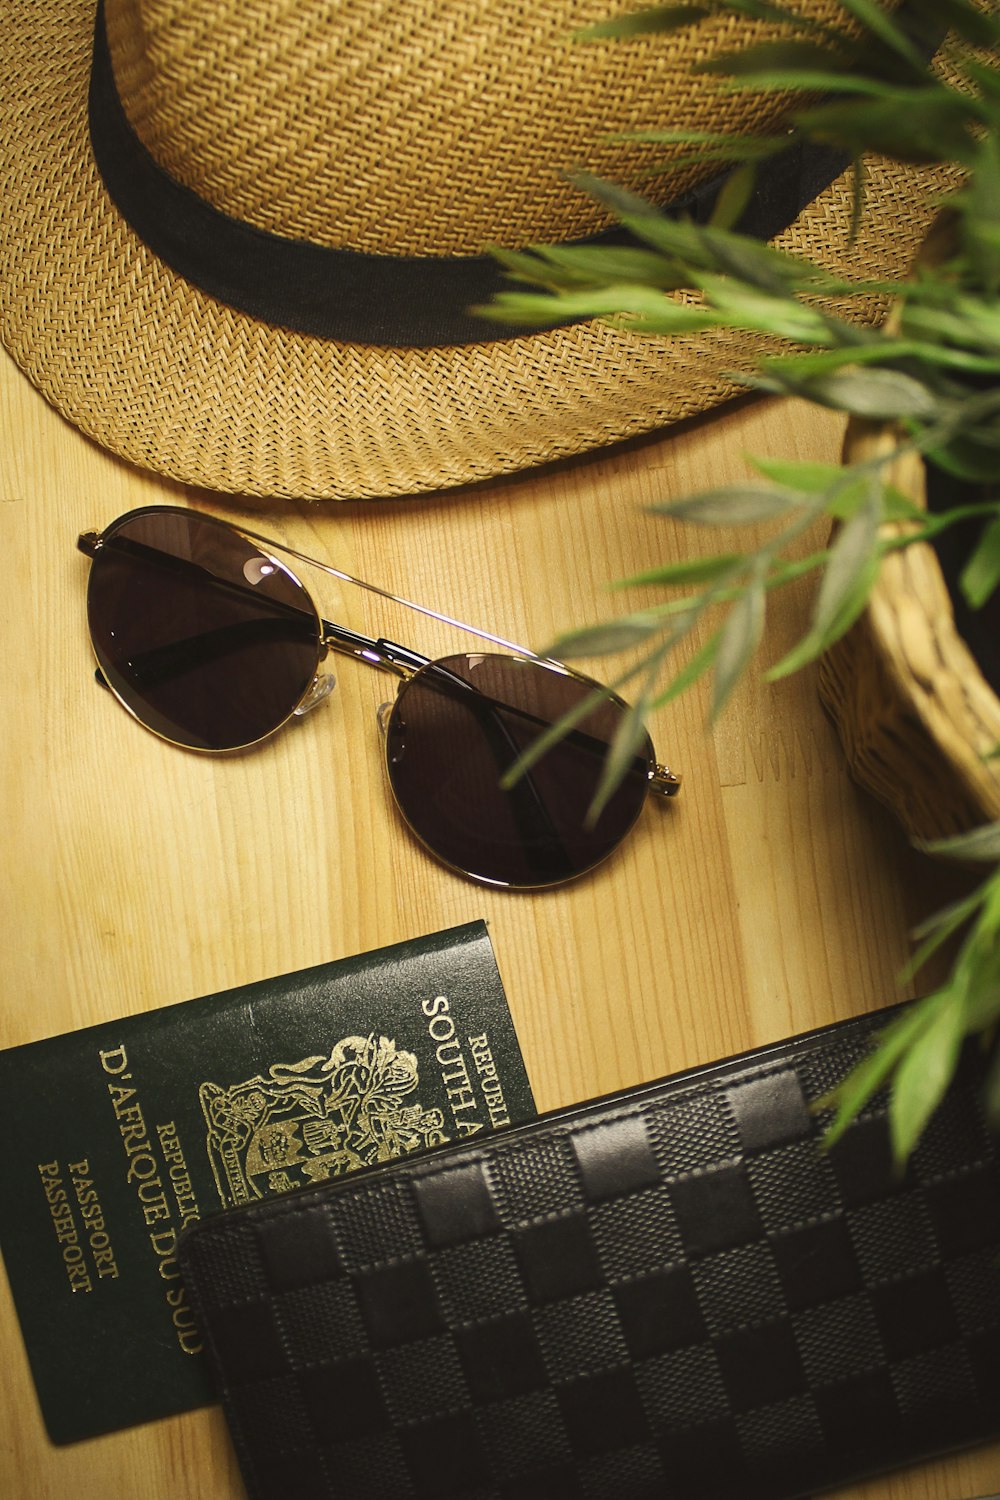 black Louis Vuitton leather wallet beside passport and sunglasses